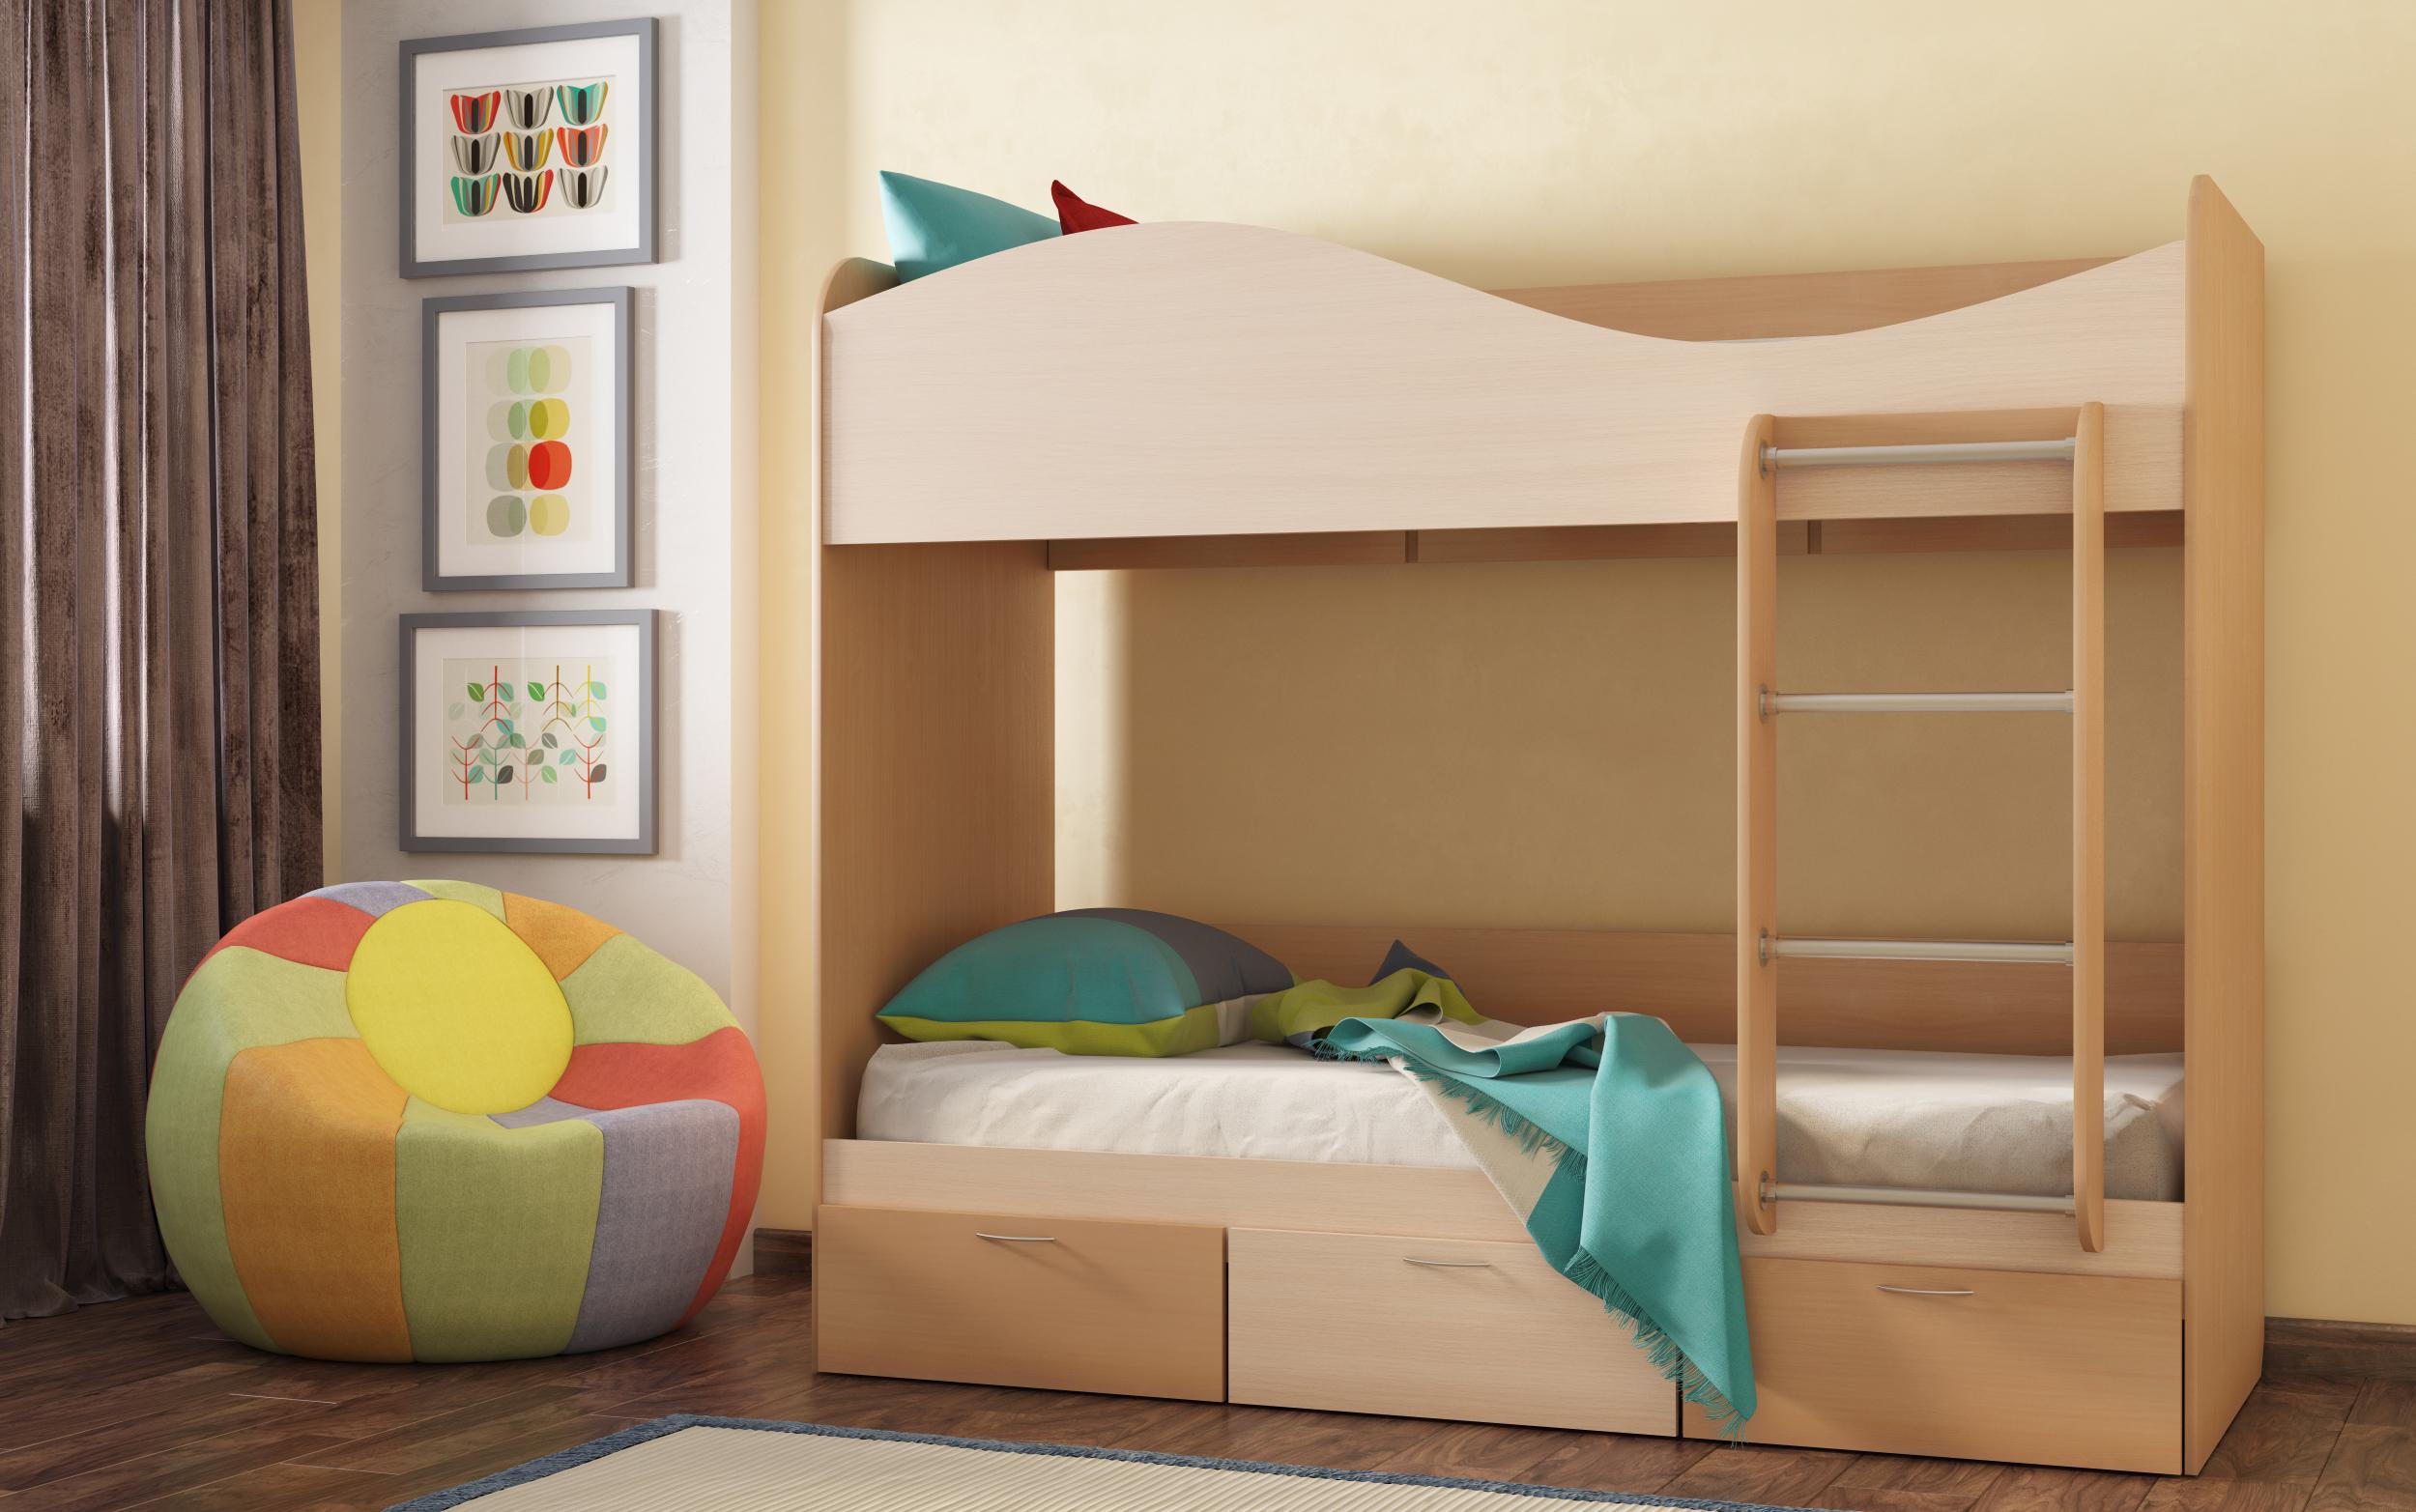 A double deck bed utilizing vertical space with drawers